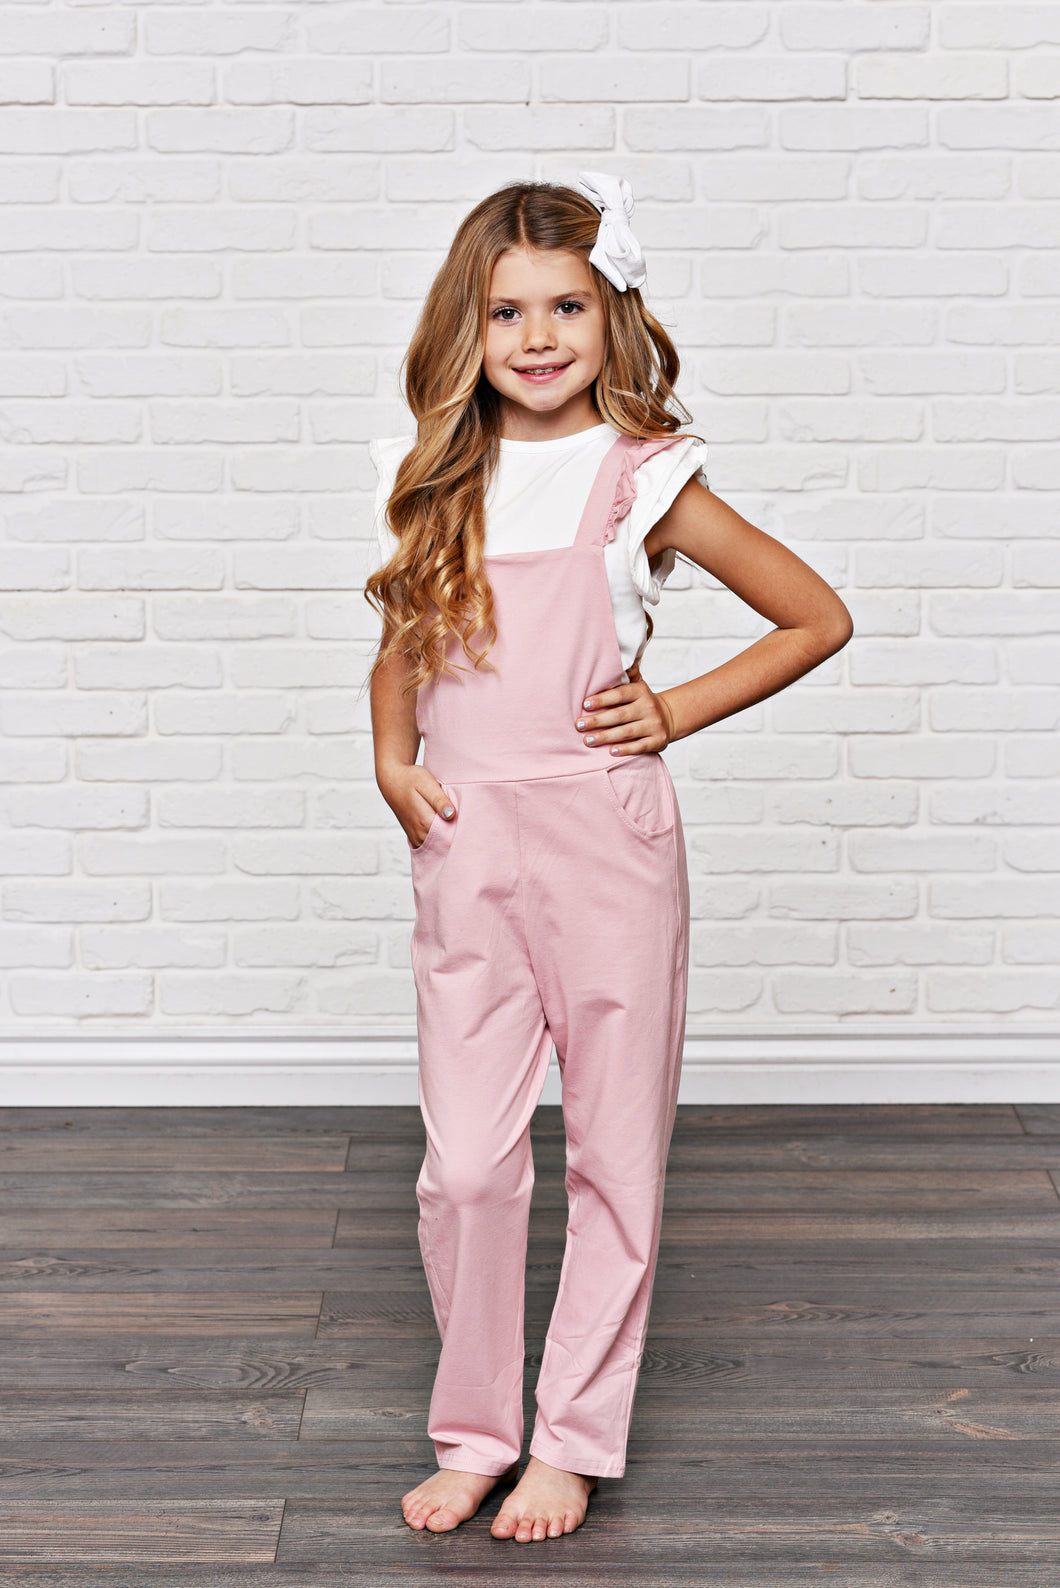 Dusty Rose Ruffle Overall